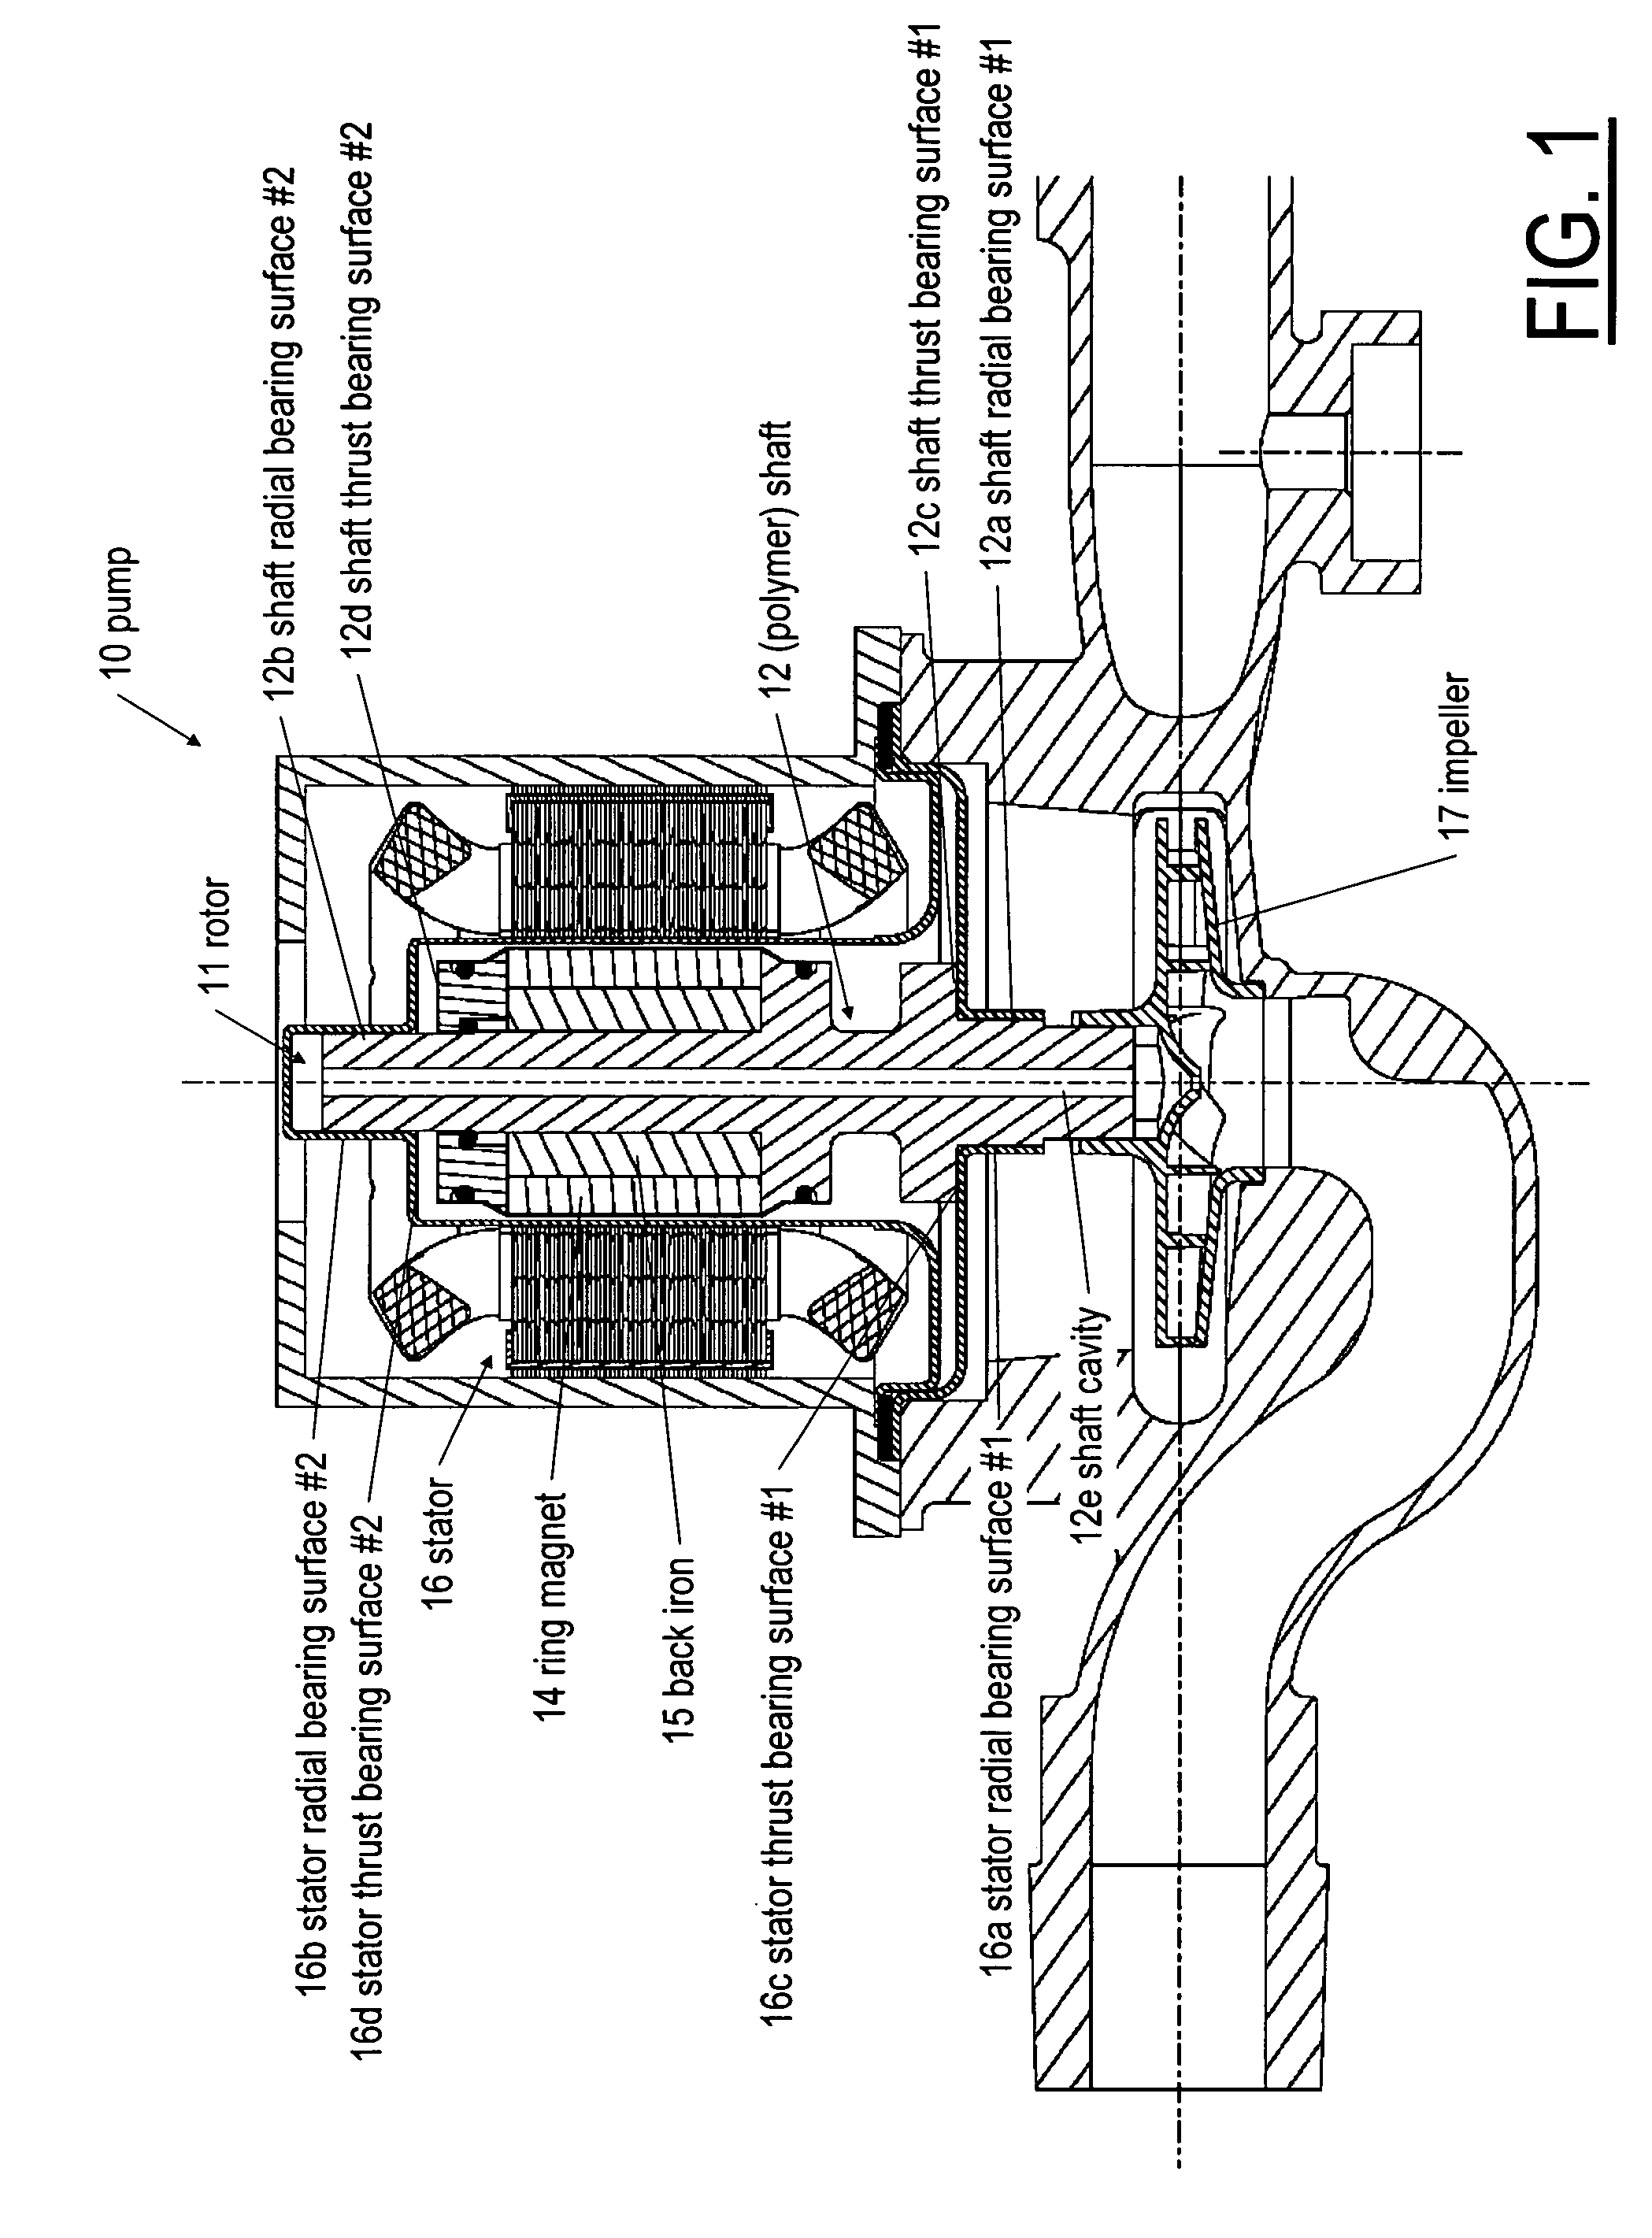 Rotating machine having a shaft including an integral bearing surface